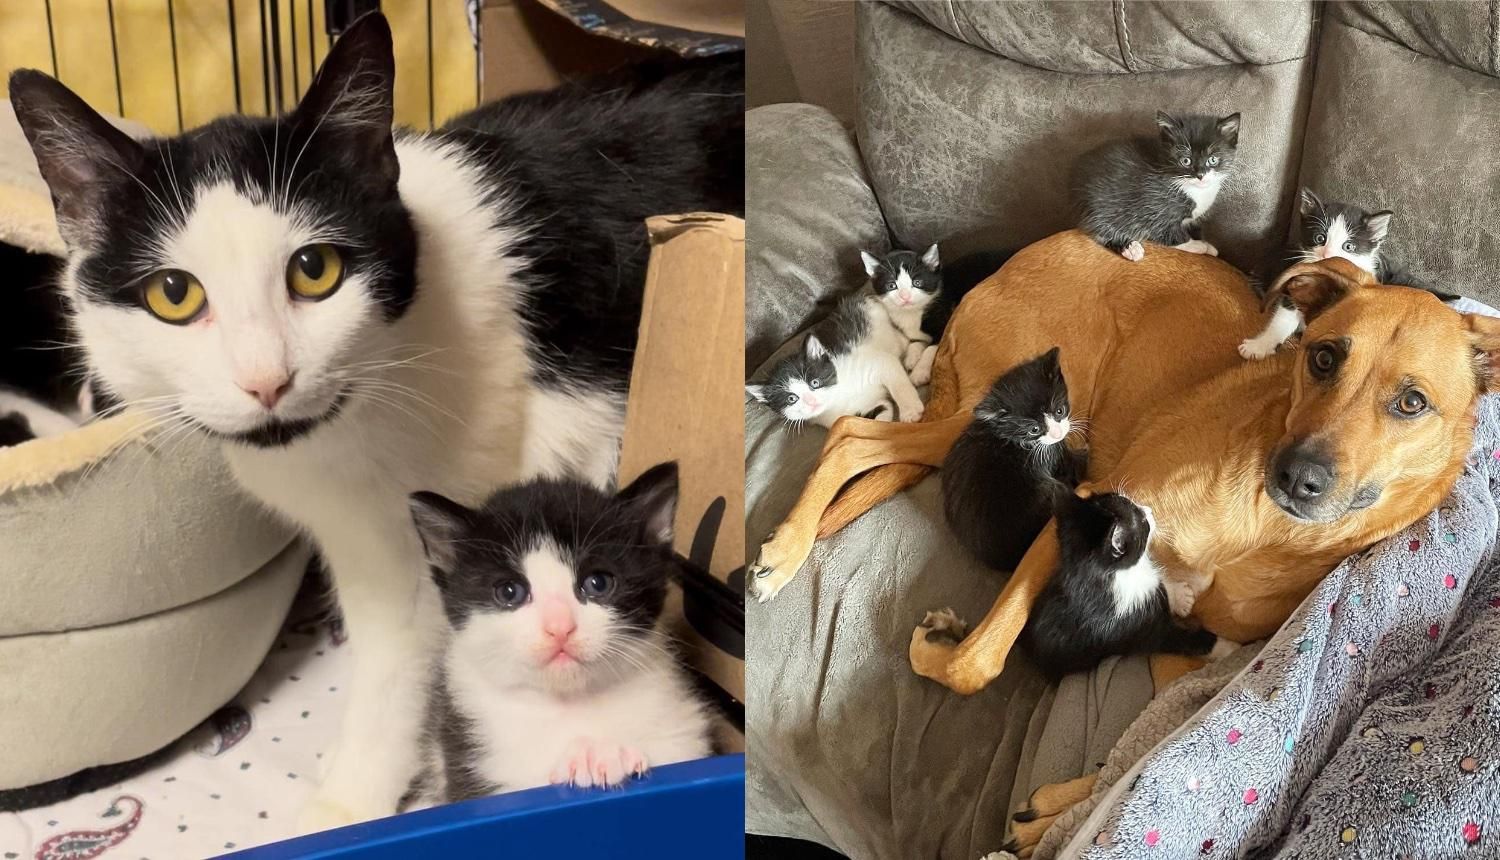 Cat Gets Some Help from Canine Buddy to Raise 7 Tuxedo Kittens While She Learns to Trust